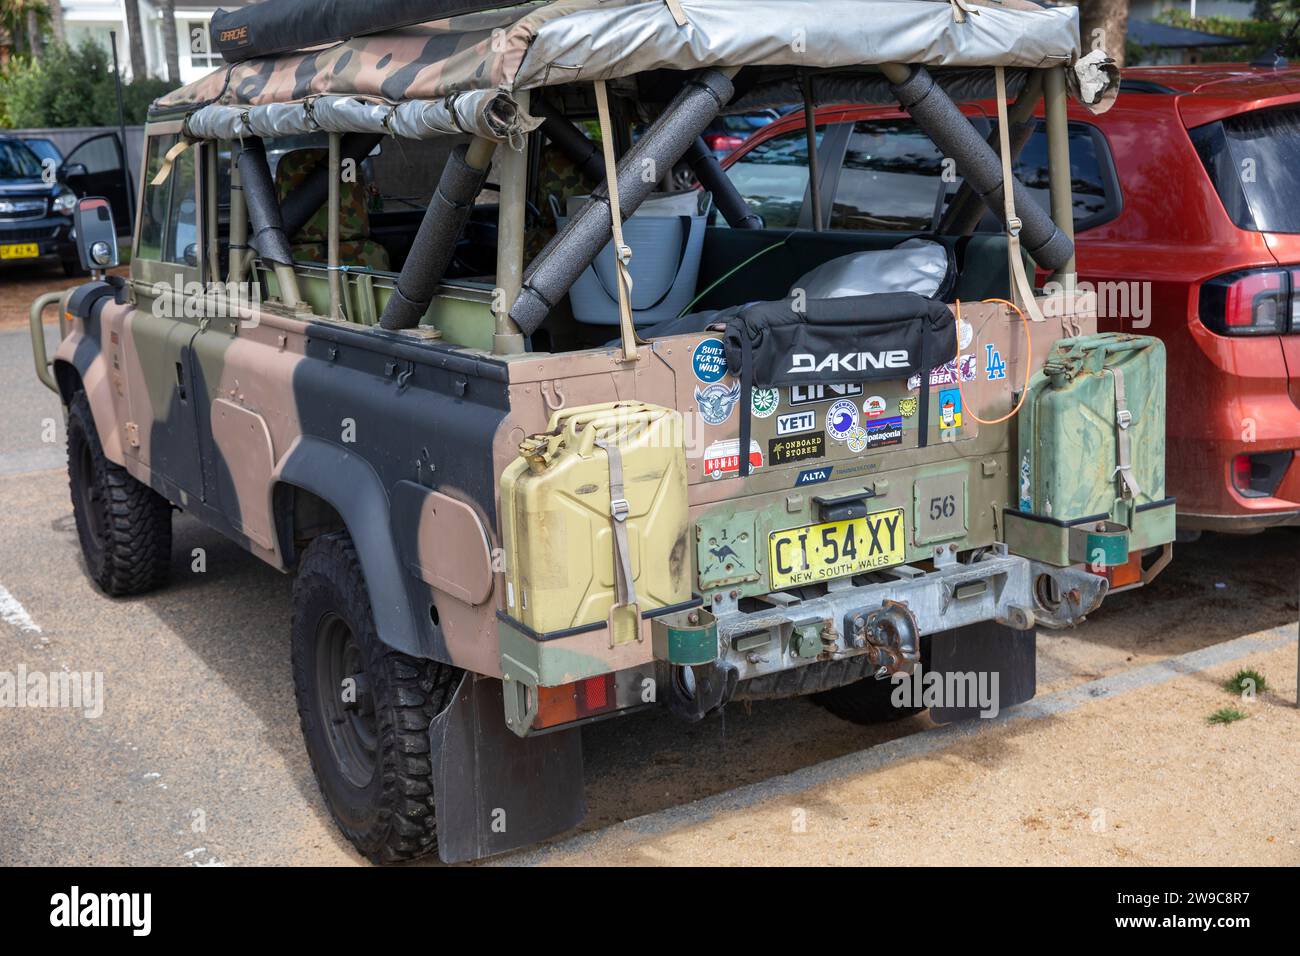 1989 model Land Rover Defender parked in Sydney Australia water fuel containers carried on rear bumper, Australia Stock Photo